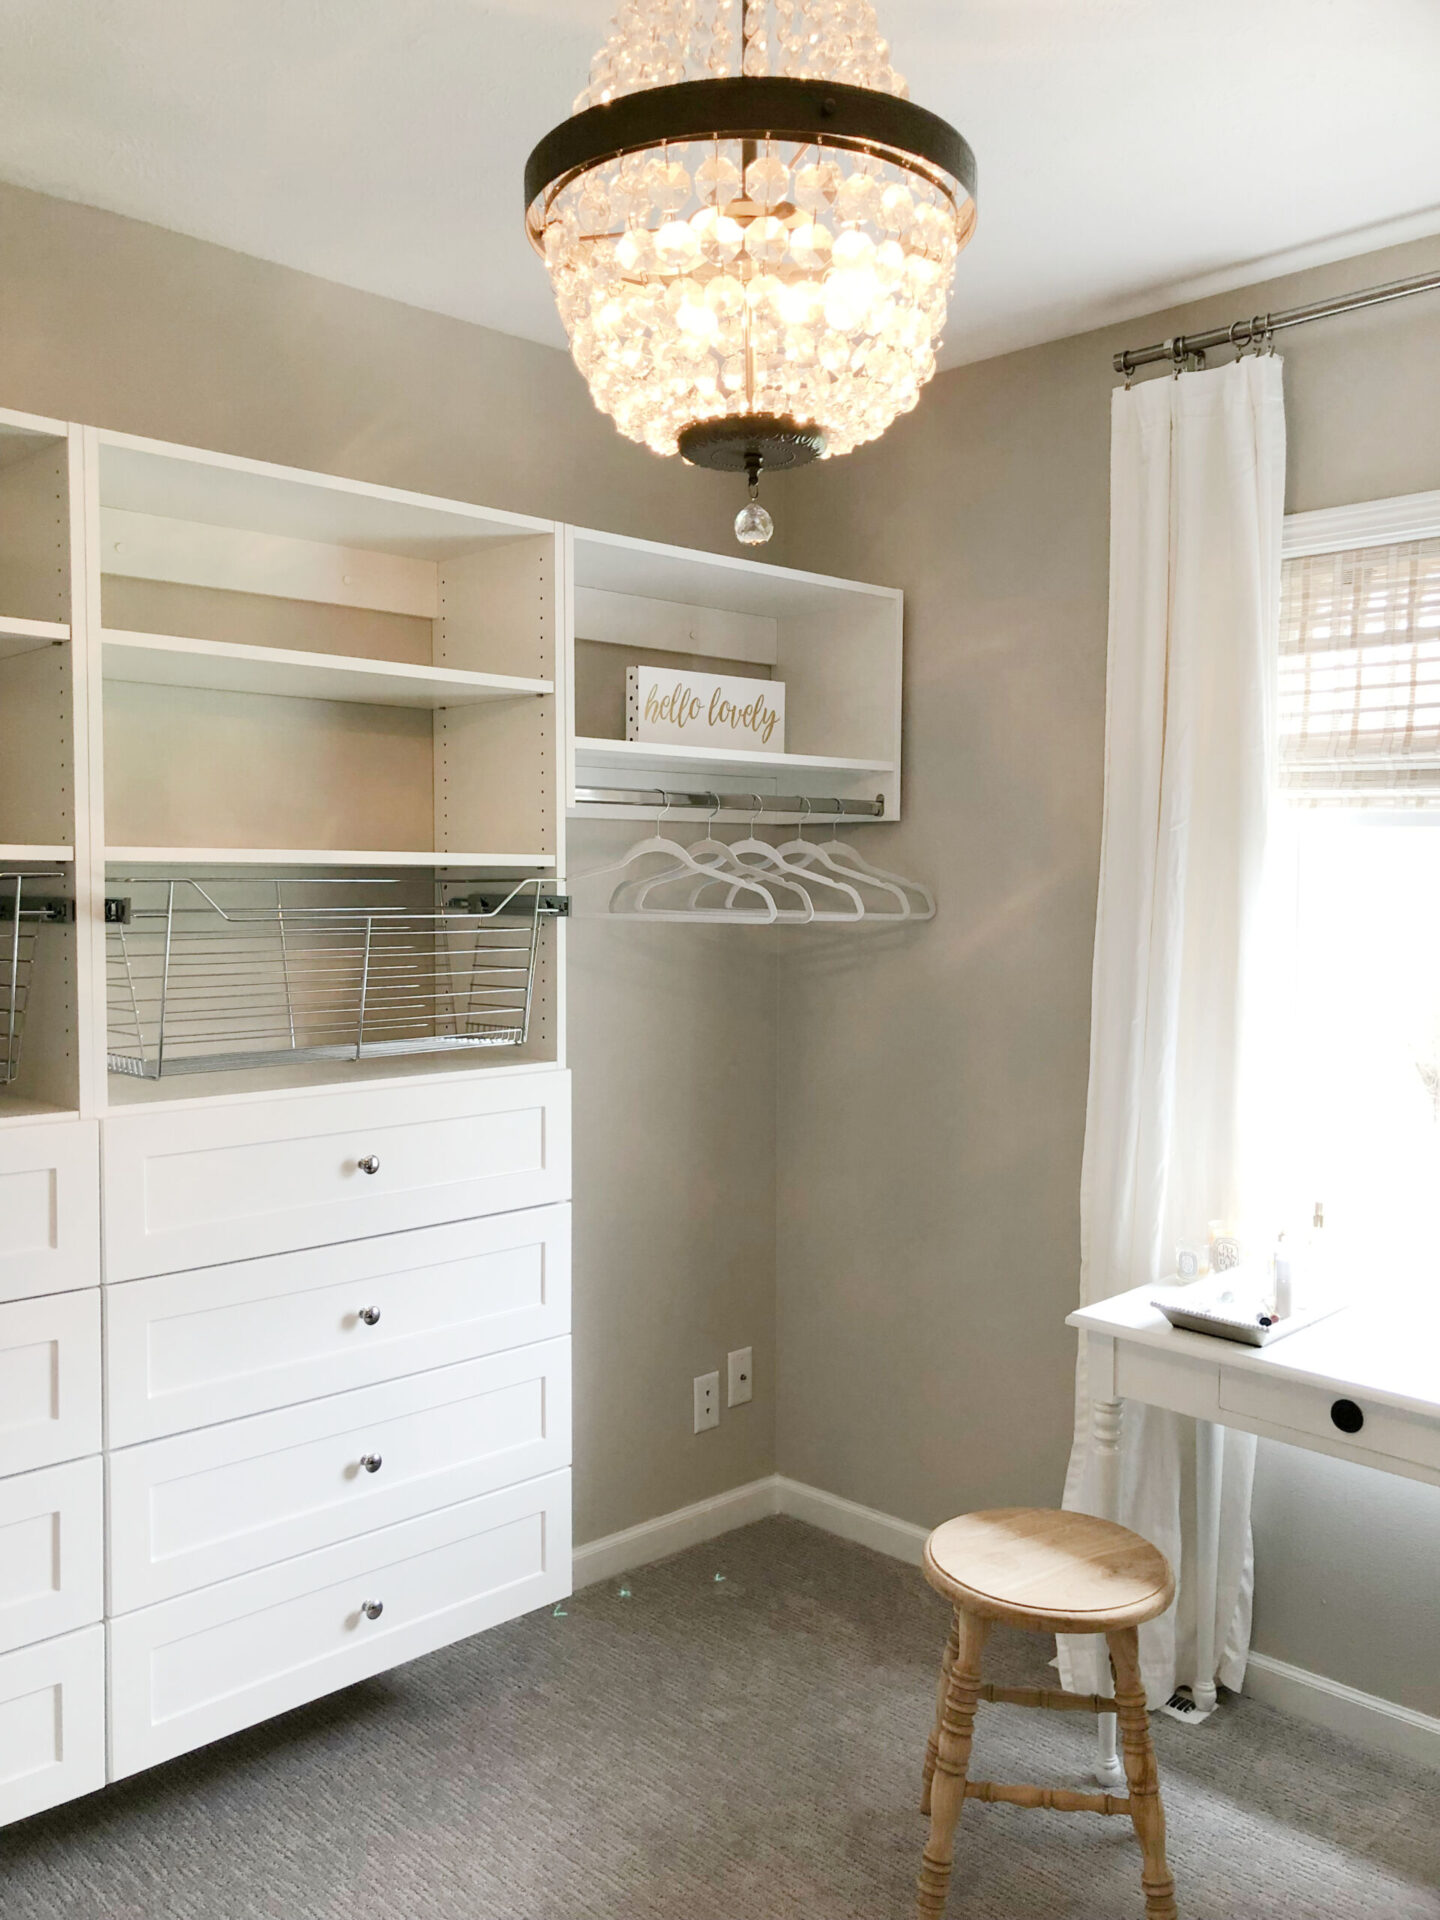 This cloffice dressing room was a perfect solution to my storage needs and a great DIY closet upgrade! Hello Lovely Studio. #diycloset #cloffice #dressingroom